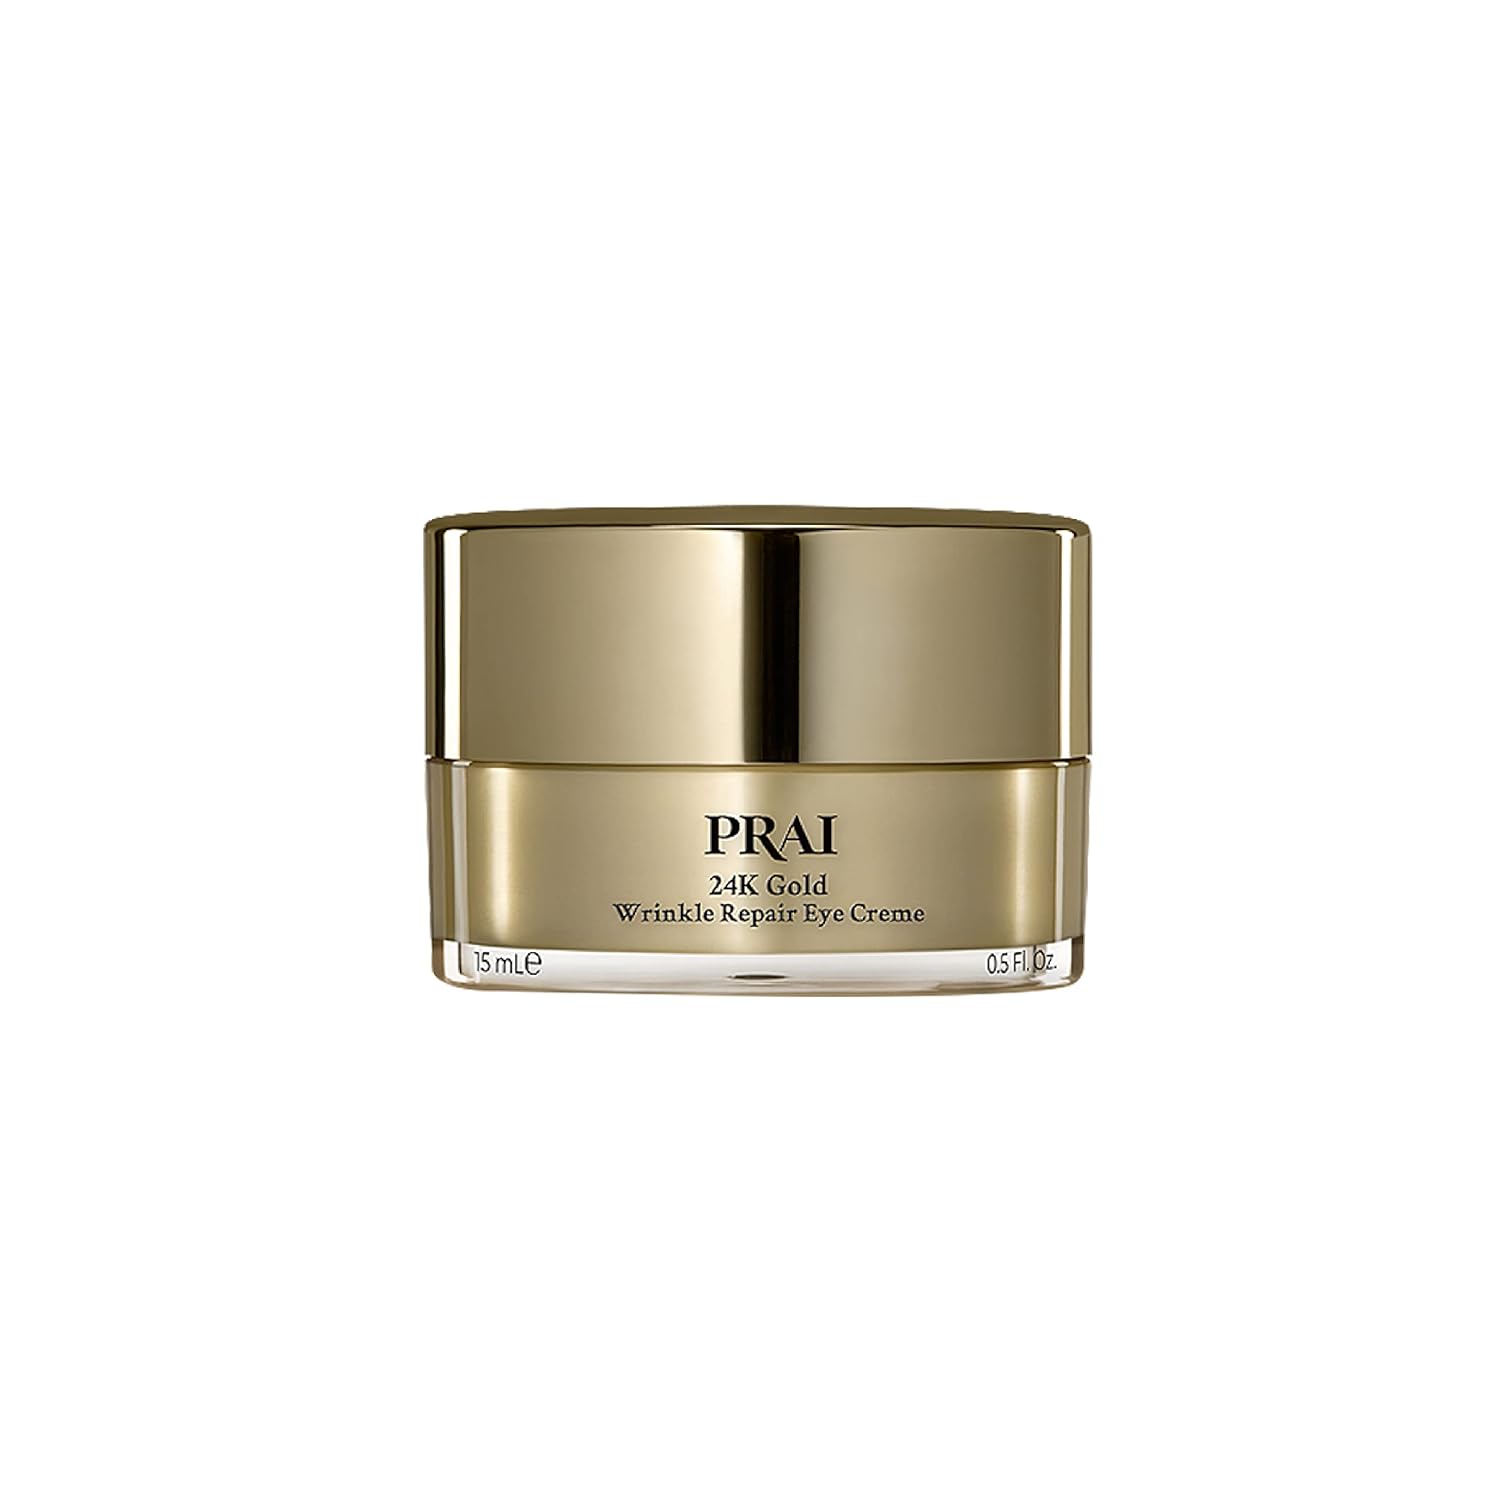 PRAI Beauty 24K Gold Wrinkle Repair Eye Creme - Anti-Aging and Anti-Wrinkle Eye Cream - Infused with Hyaluronic Acid and Real 24K Gold, 0.5